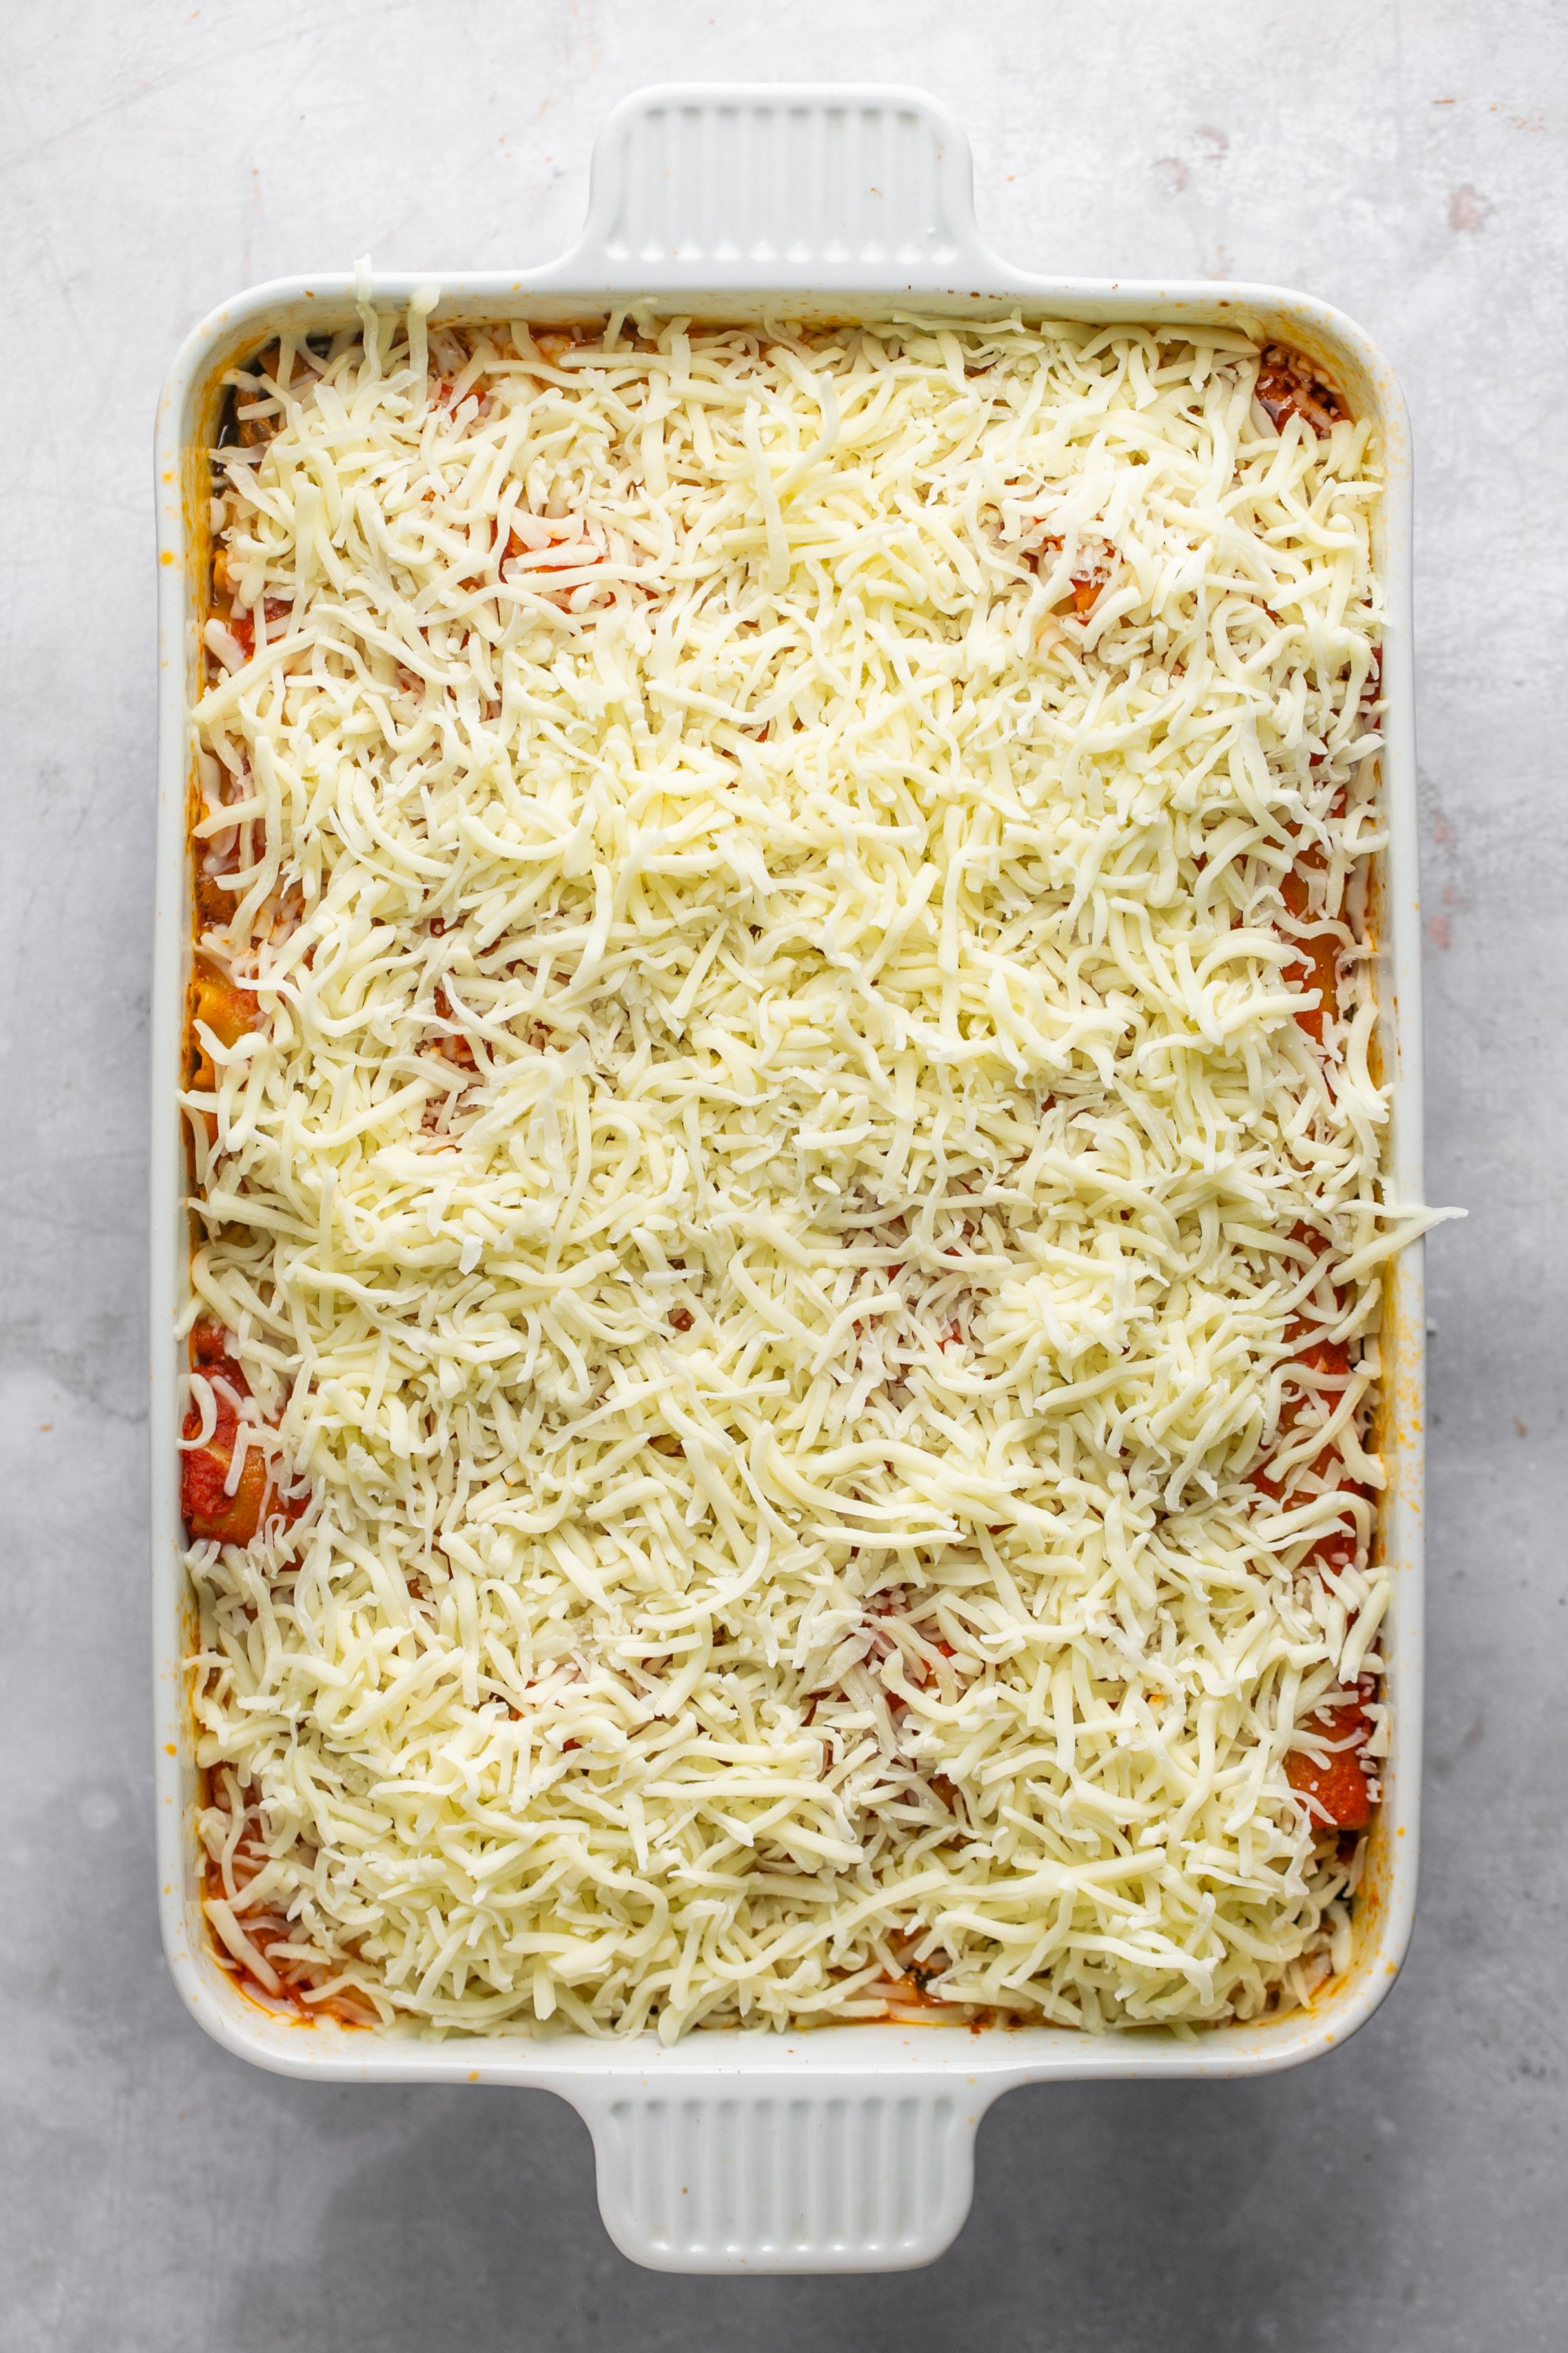 A white casserole dish flled with cooked lasagna topped with unmelted shredded cheese. The casserole dish is sitting on a grey surface.